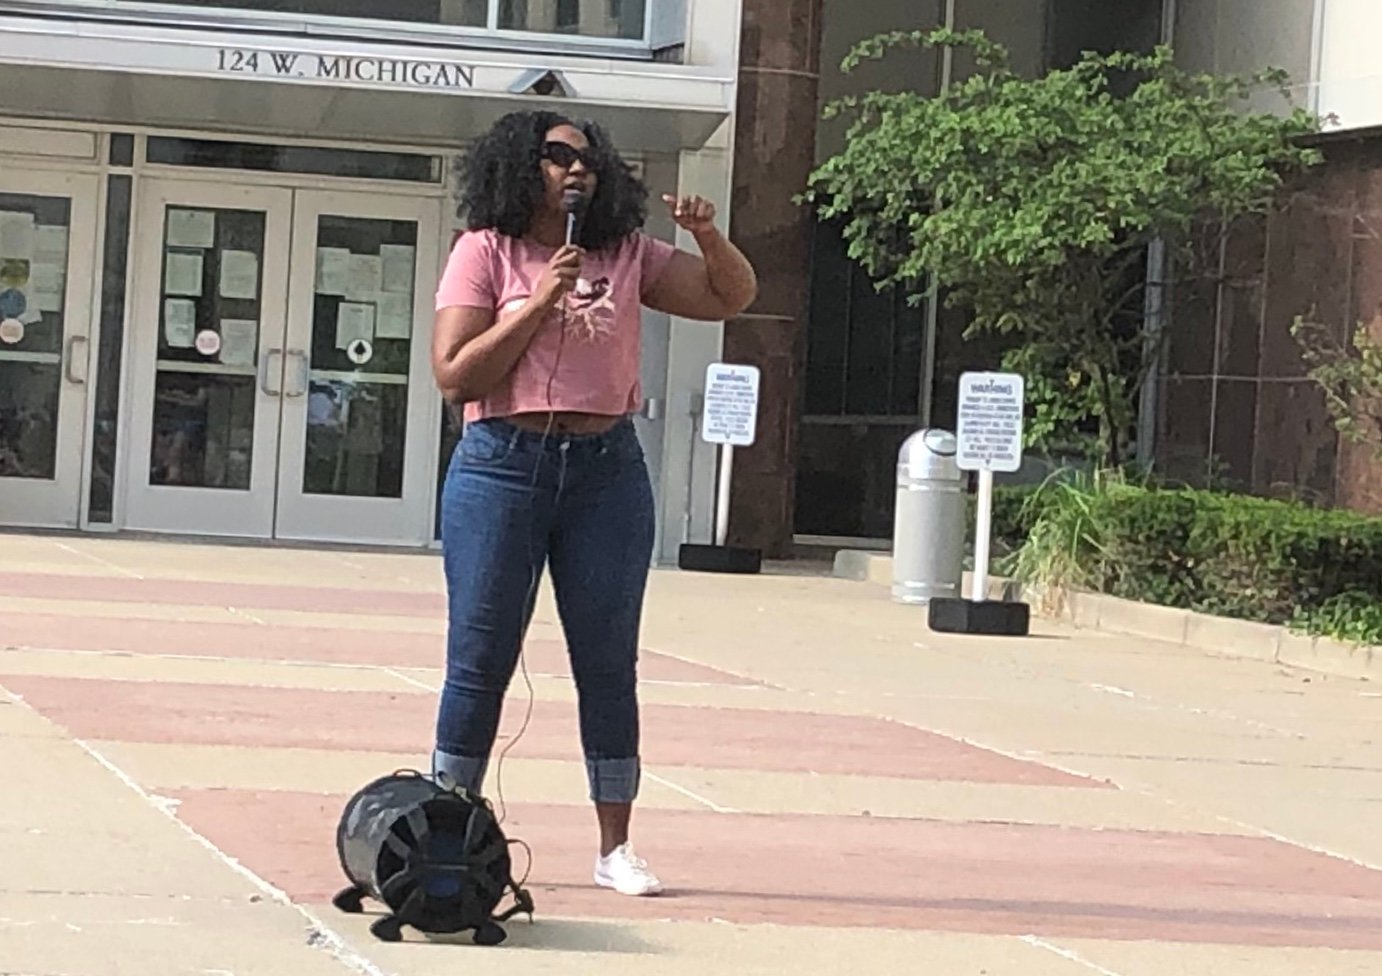 Natasha Atkinson, who claims Lansing Mayor Andy Schor fired her as a result of racial bias, speaks to a Black Lives Matter rally today in front of City Hall.